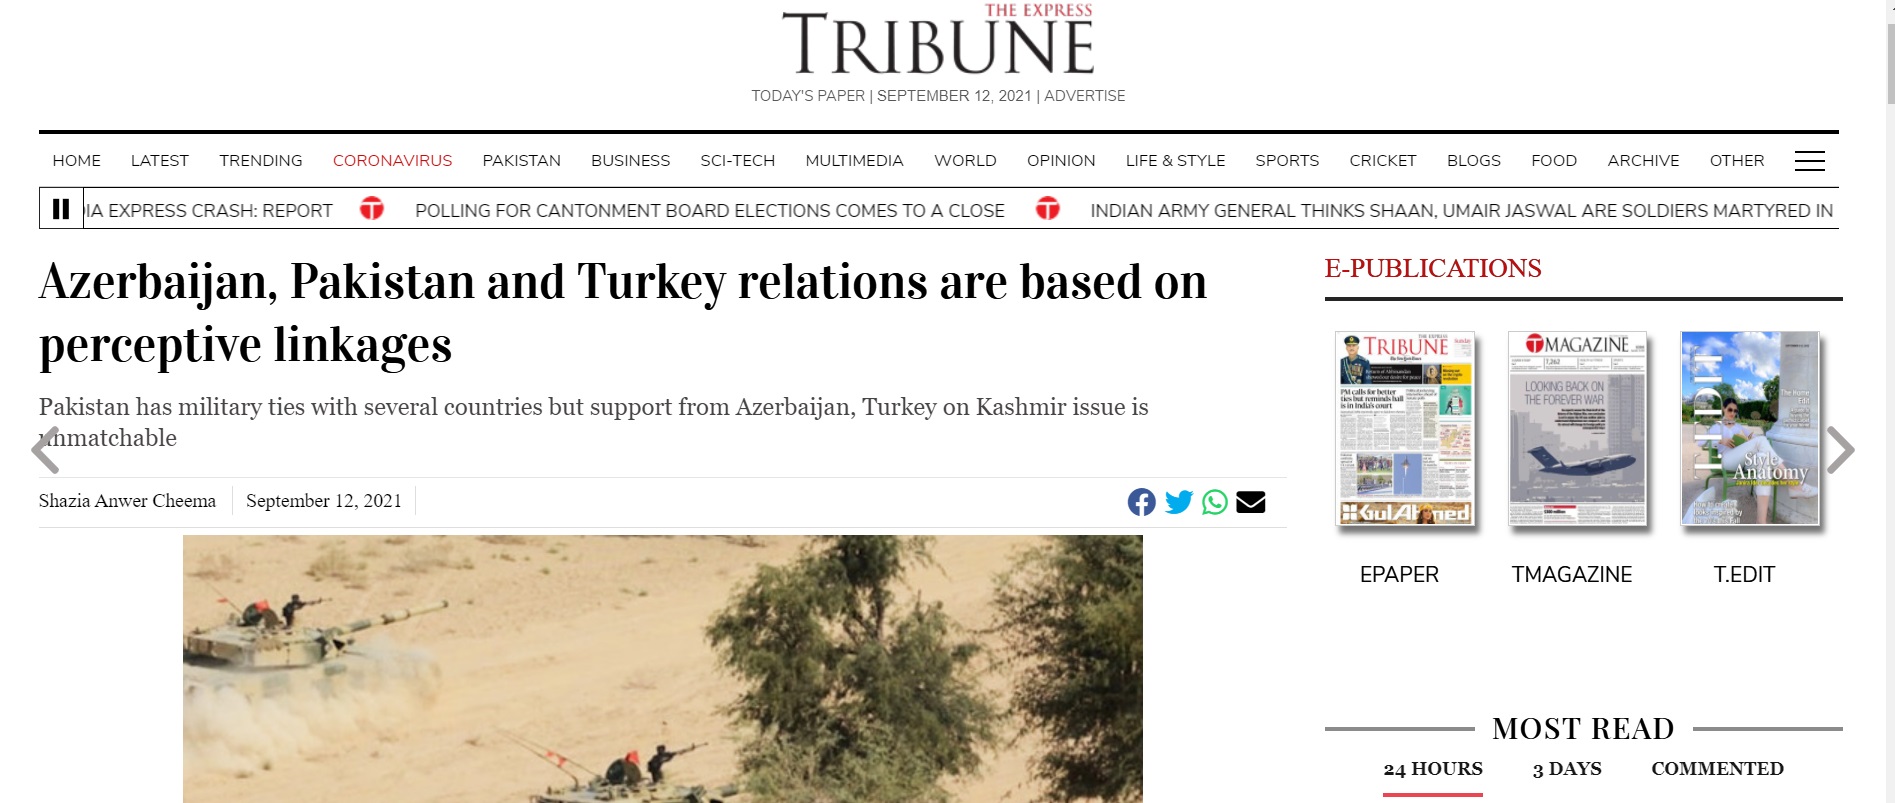 Azerbaijan-Pakistan and Turkey relations are based on Perceptive linkages, reports the Express Tribune